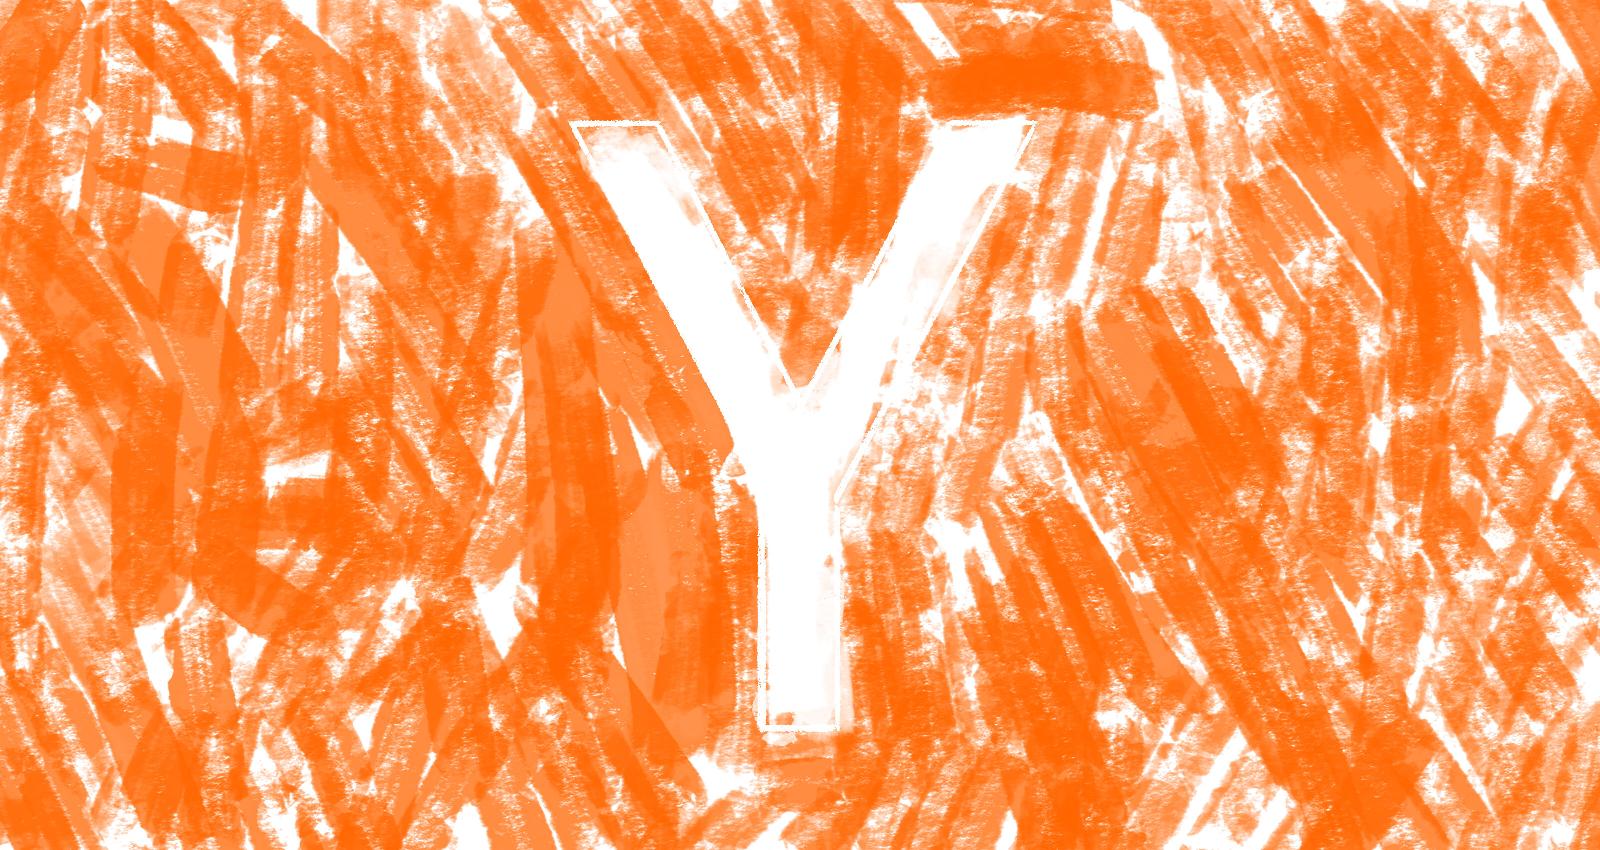 Startups Weekly: Let’s see what those Y Combinator kids have been up to this time